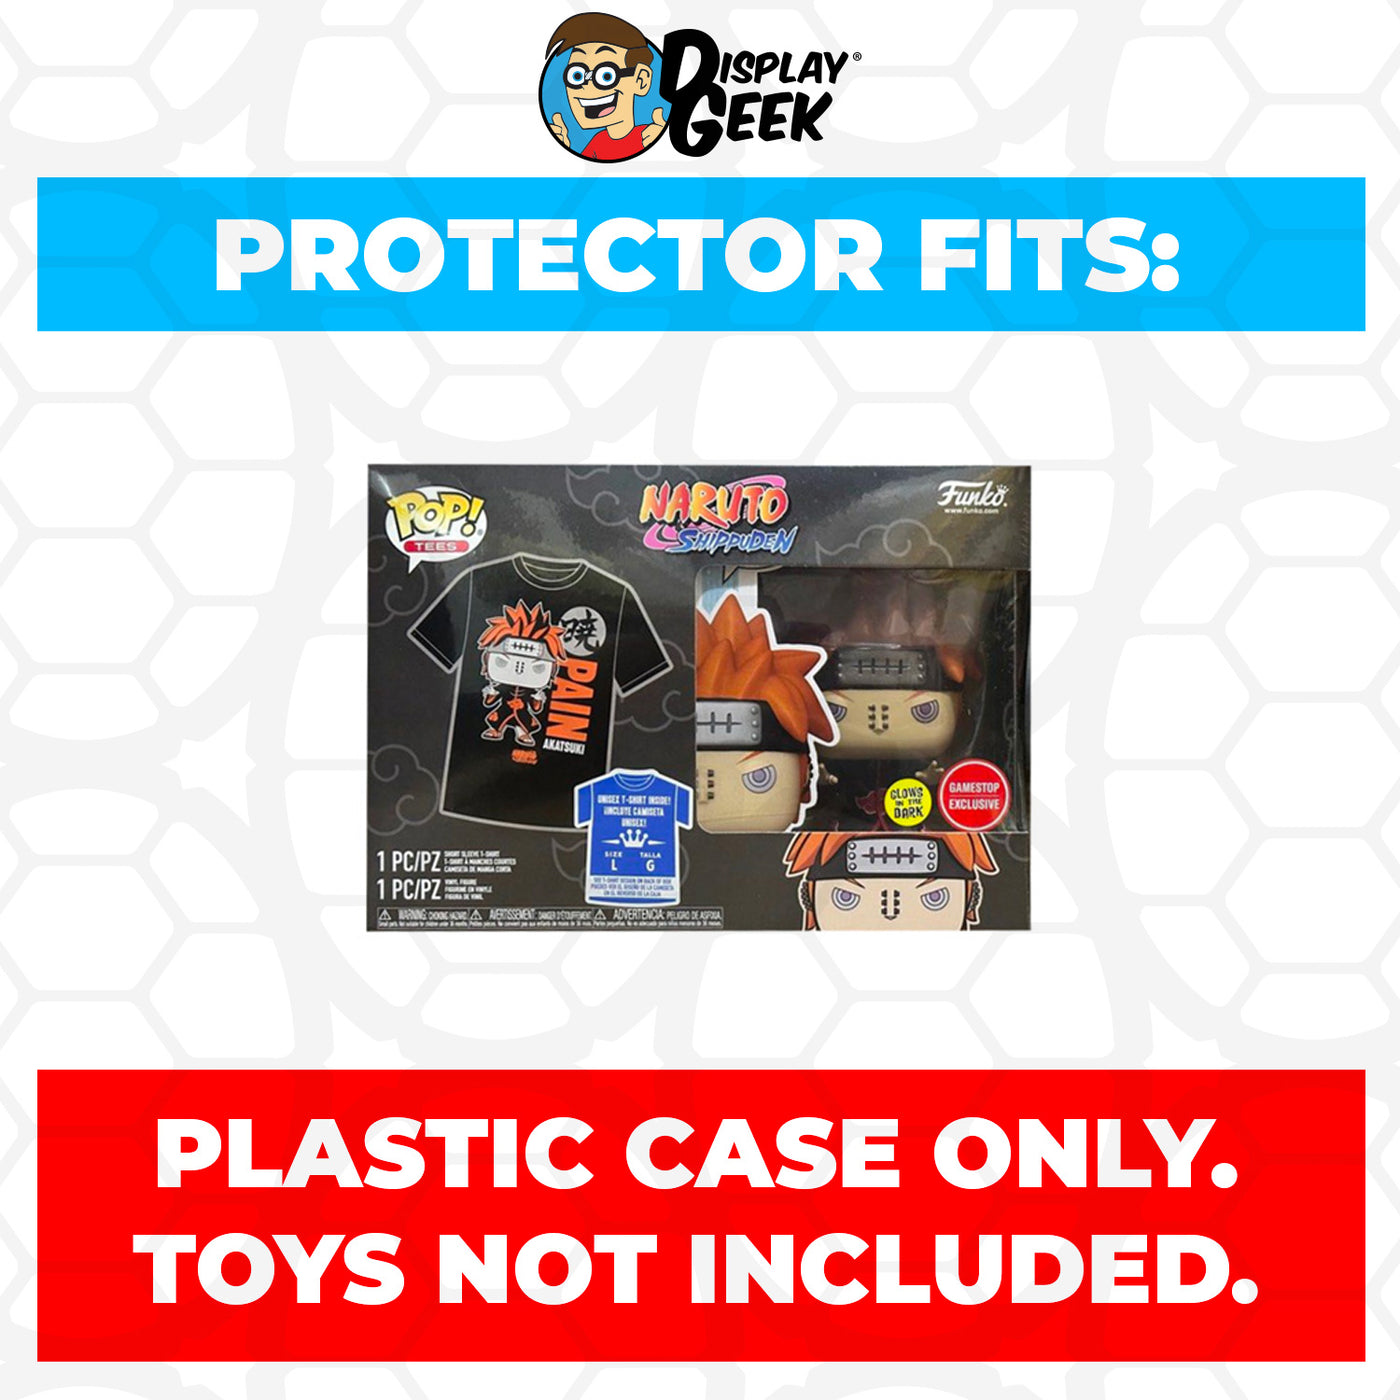 Pop Protector for Pop & Tee Pain Akatsuki Glow #934 Funko Box on The Protector Guide App by Display Geek